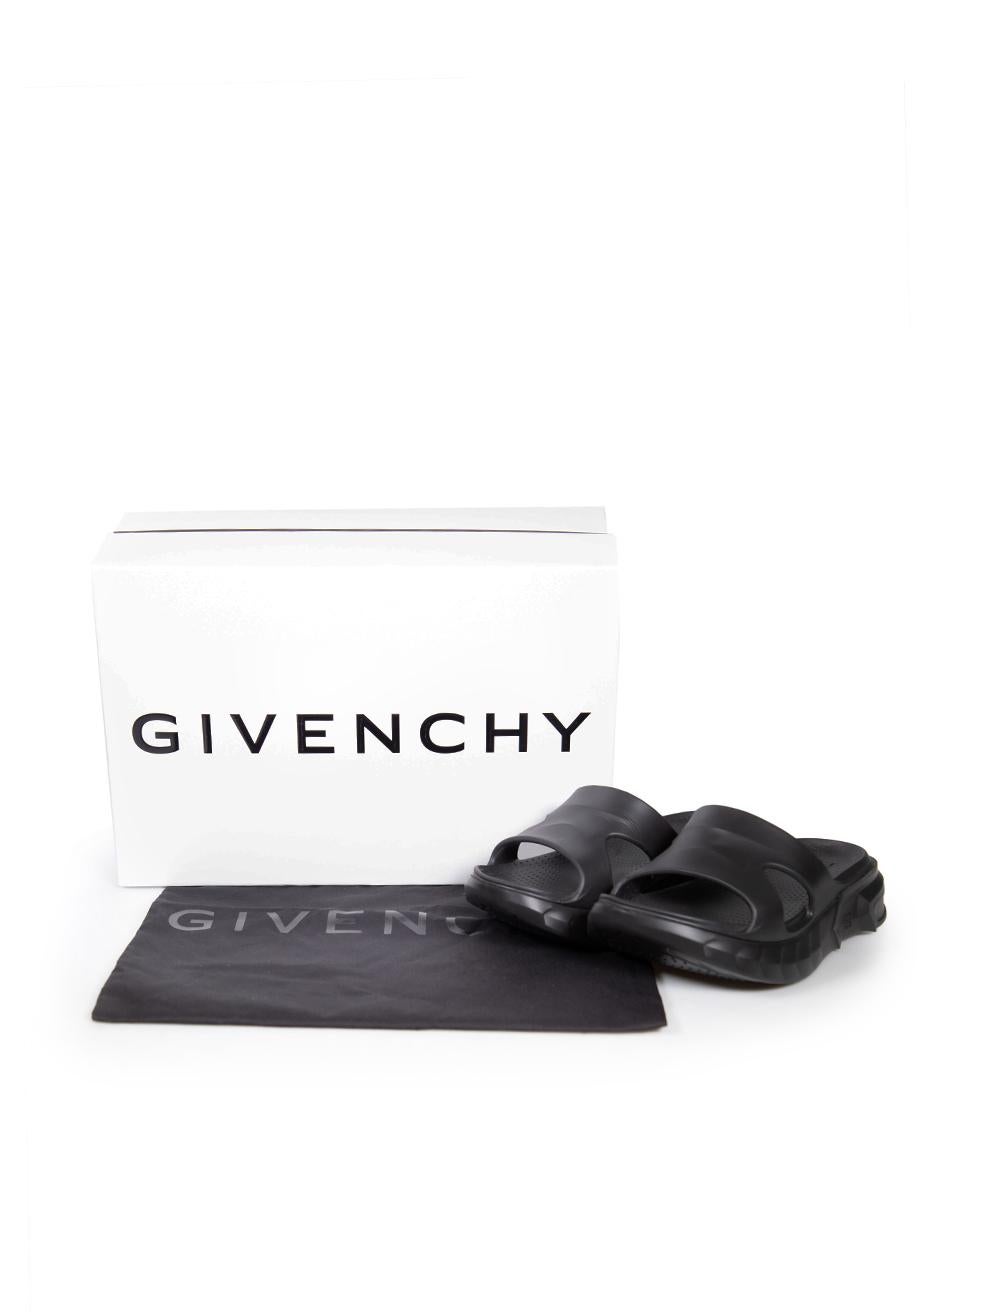 Givenchy Black Rubber Marshmallow Slides Size IT 39 For Sale 2